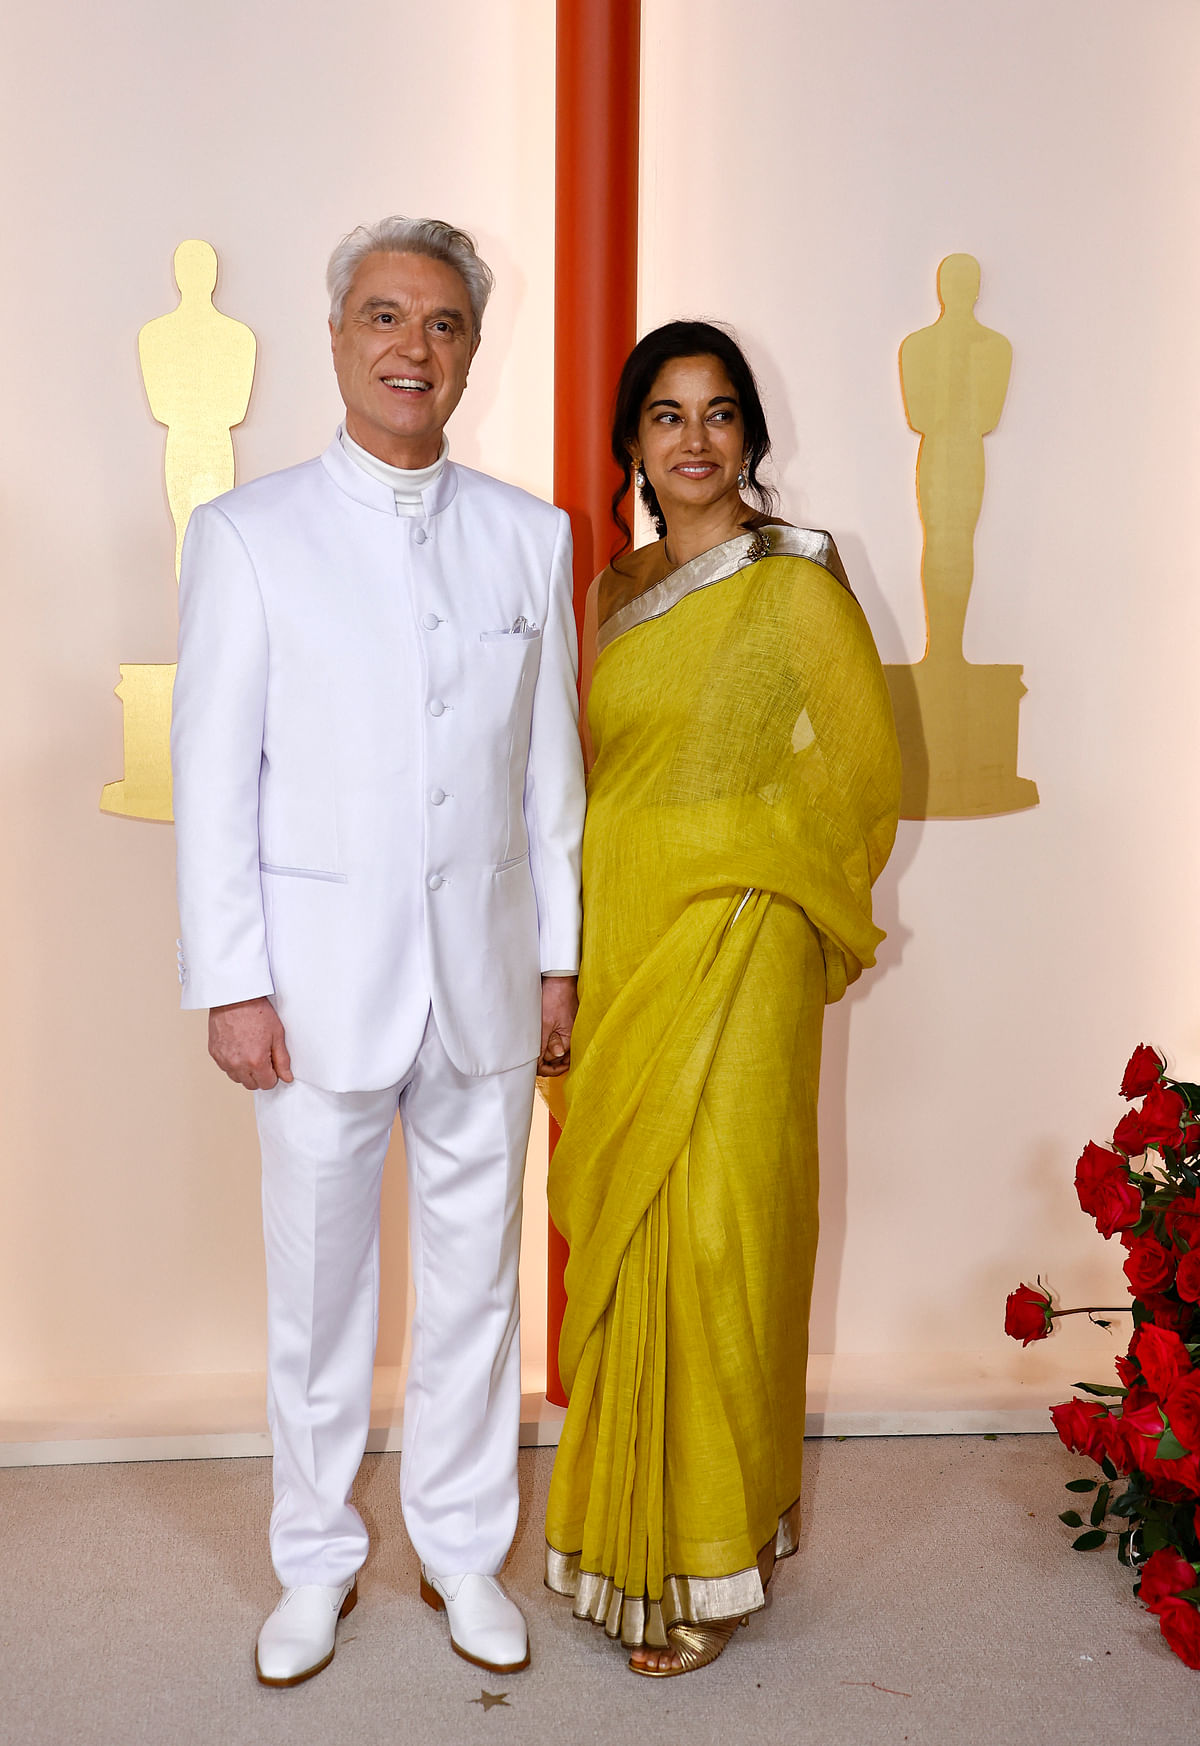 Singer-songwriter David Byrne and guest pose on the champagne-colored red carpet during the Oscars arrivals at the 95th Academy Awards in Hollywood, Los Angeles, California, US, 12 March, 2023. 